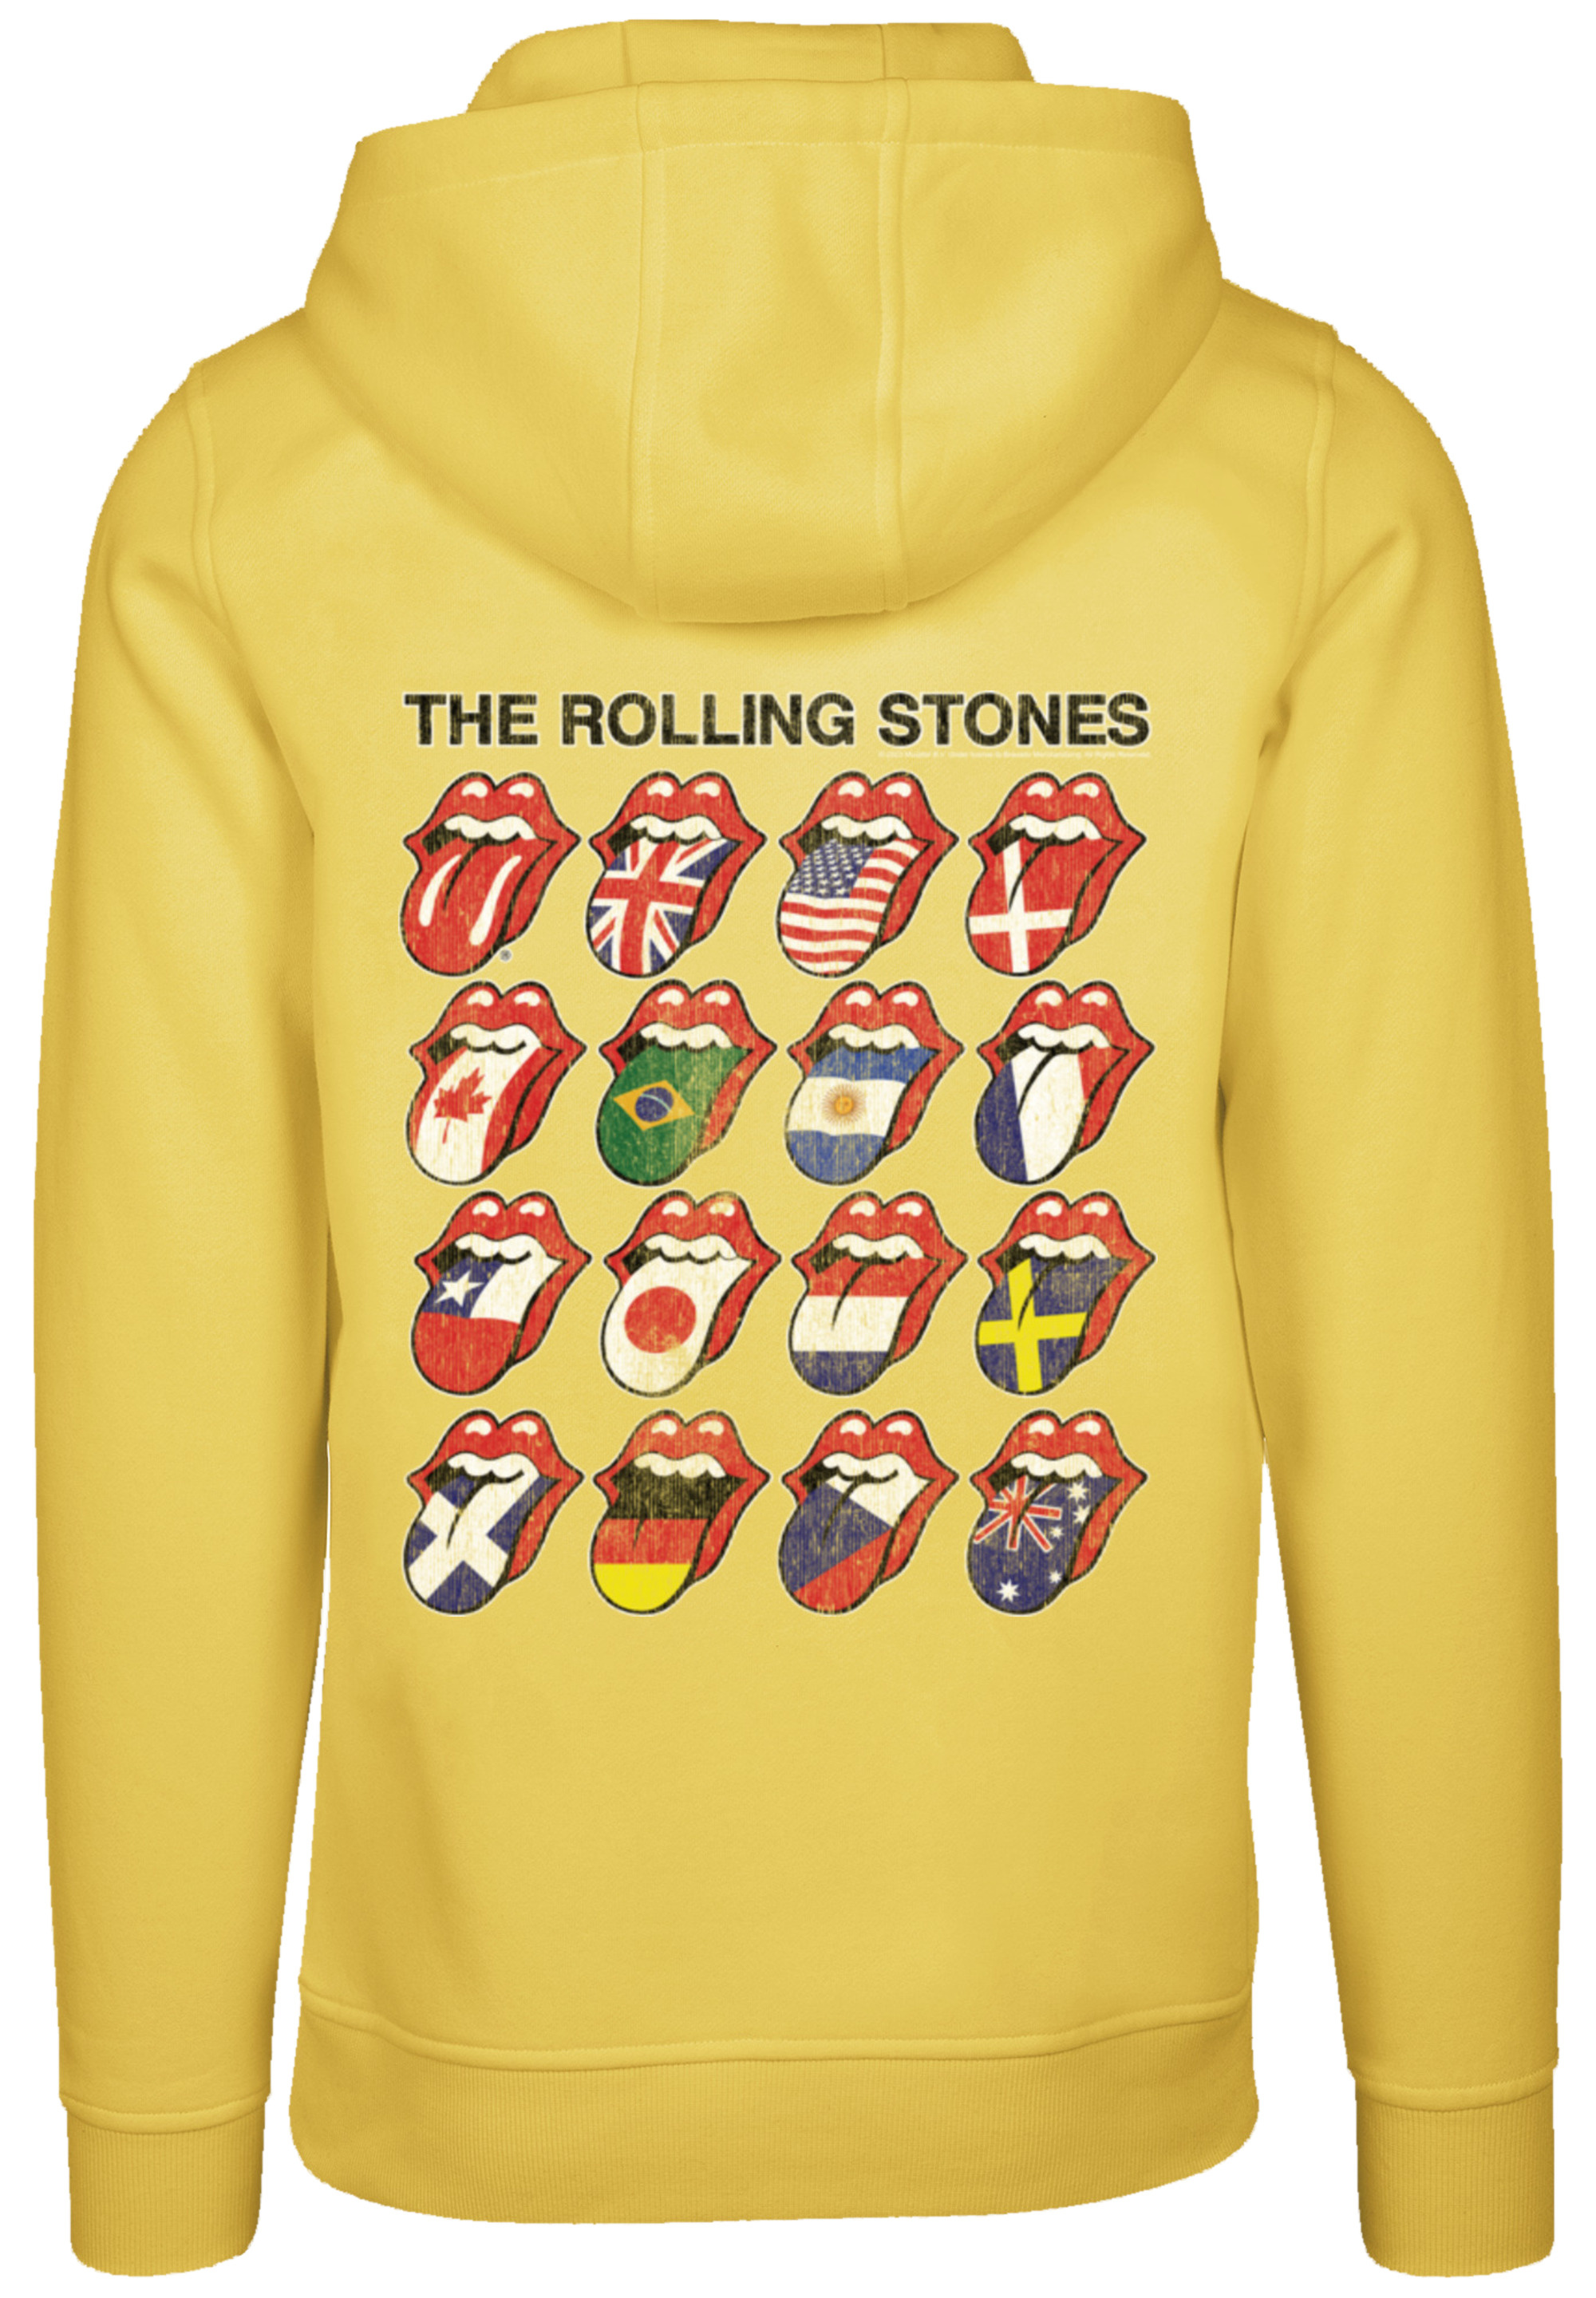 Пуловер F4NT4STIC Hoodie The Rolling Stones Voodoo Lounge Tongues, цвет taxi yellow